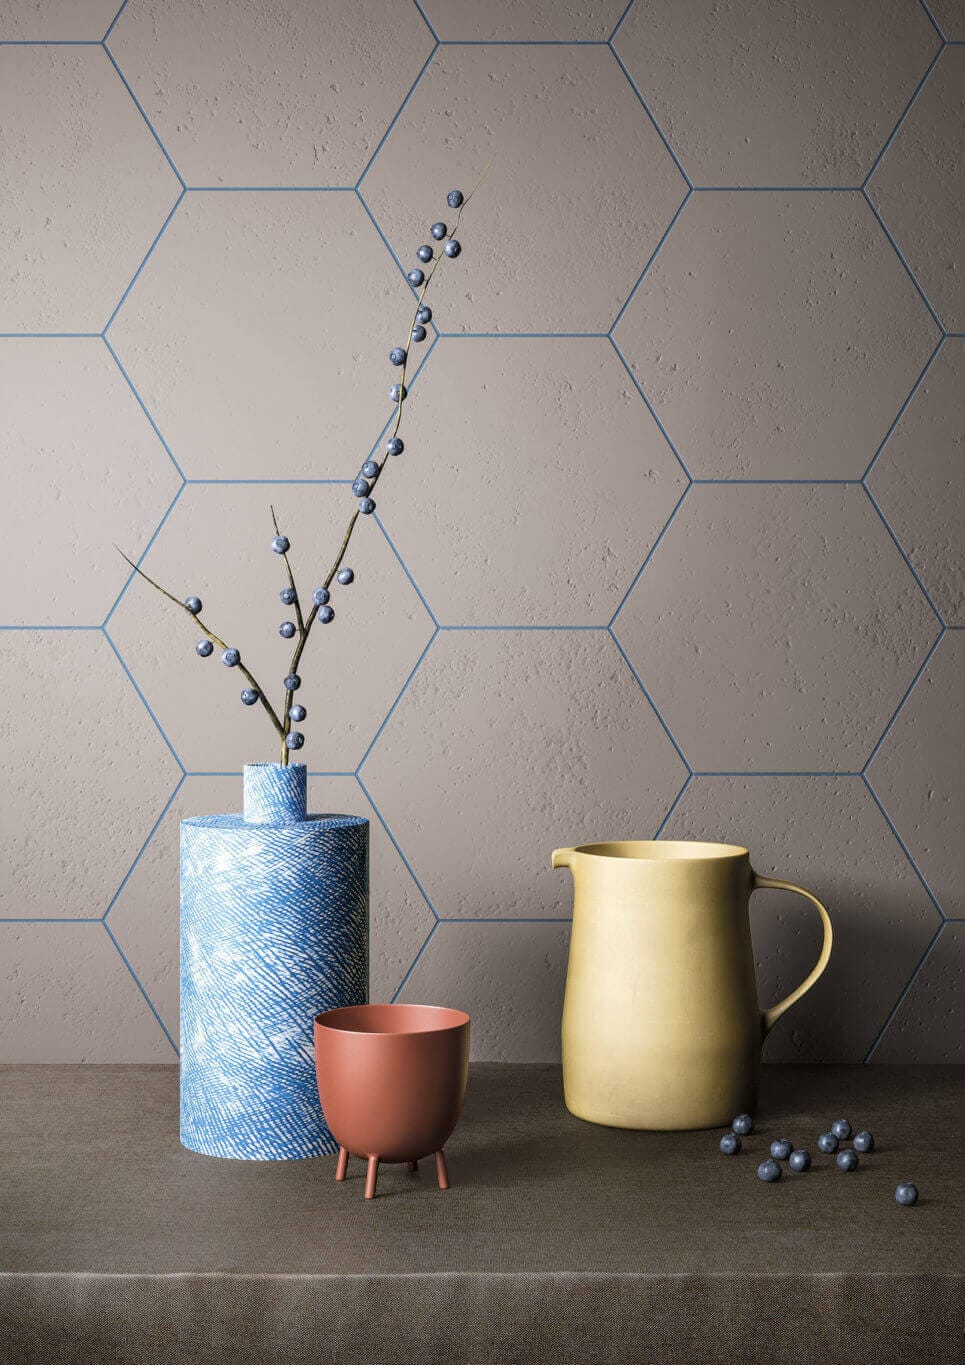 Hexagon tile wall with blue grout